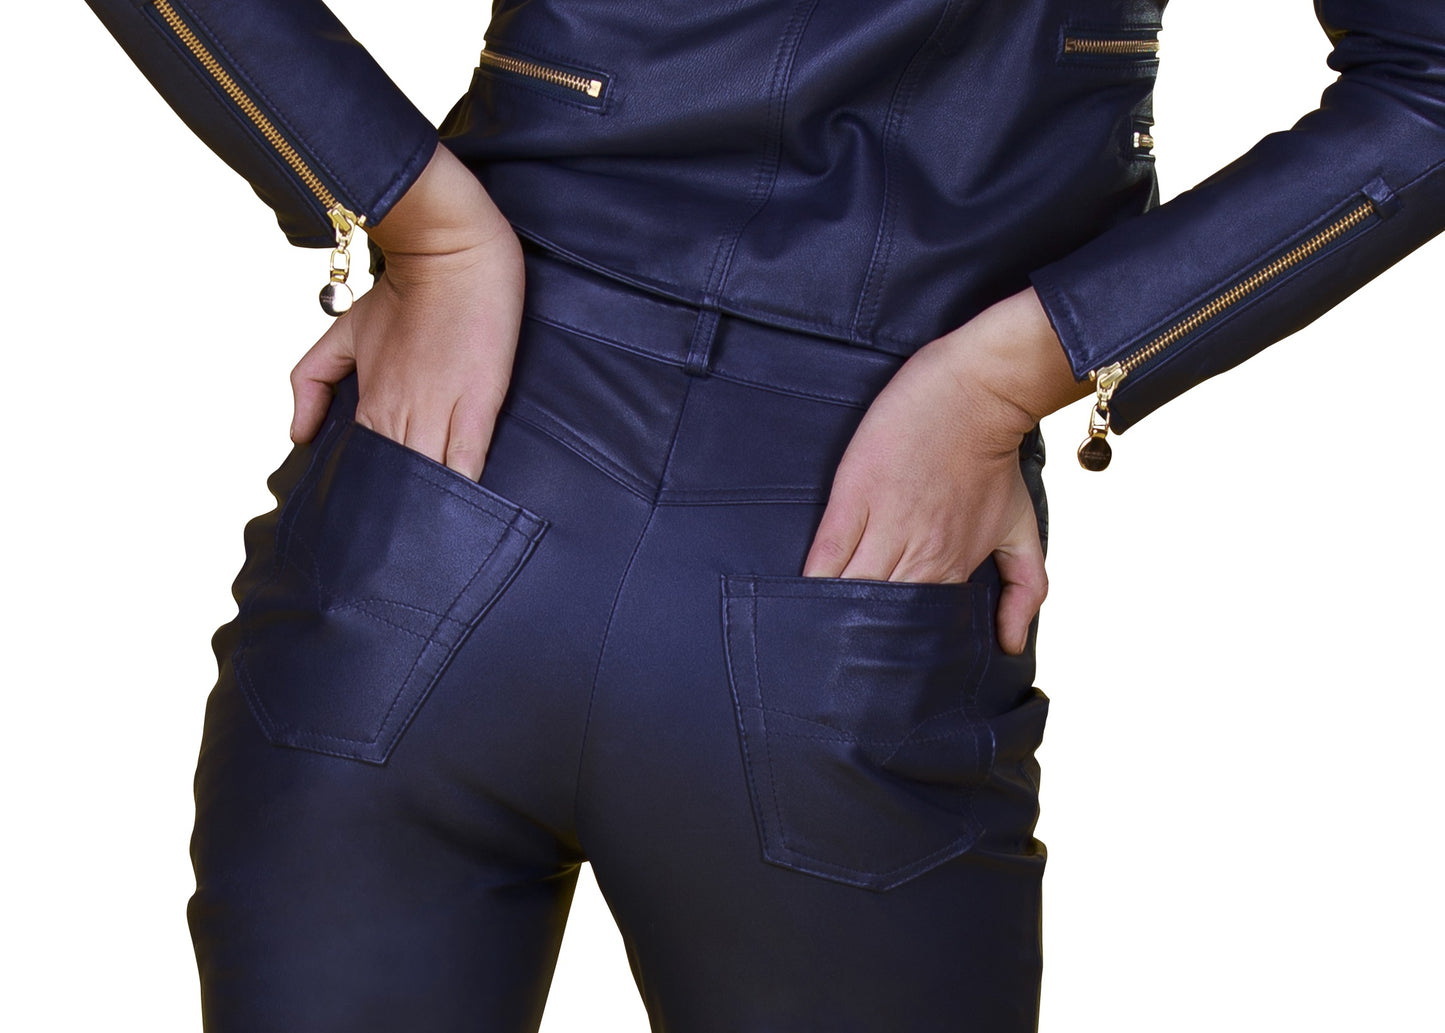 Fitted Zipper Reindeer Leather Pants -  Limited Edition